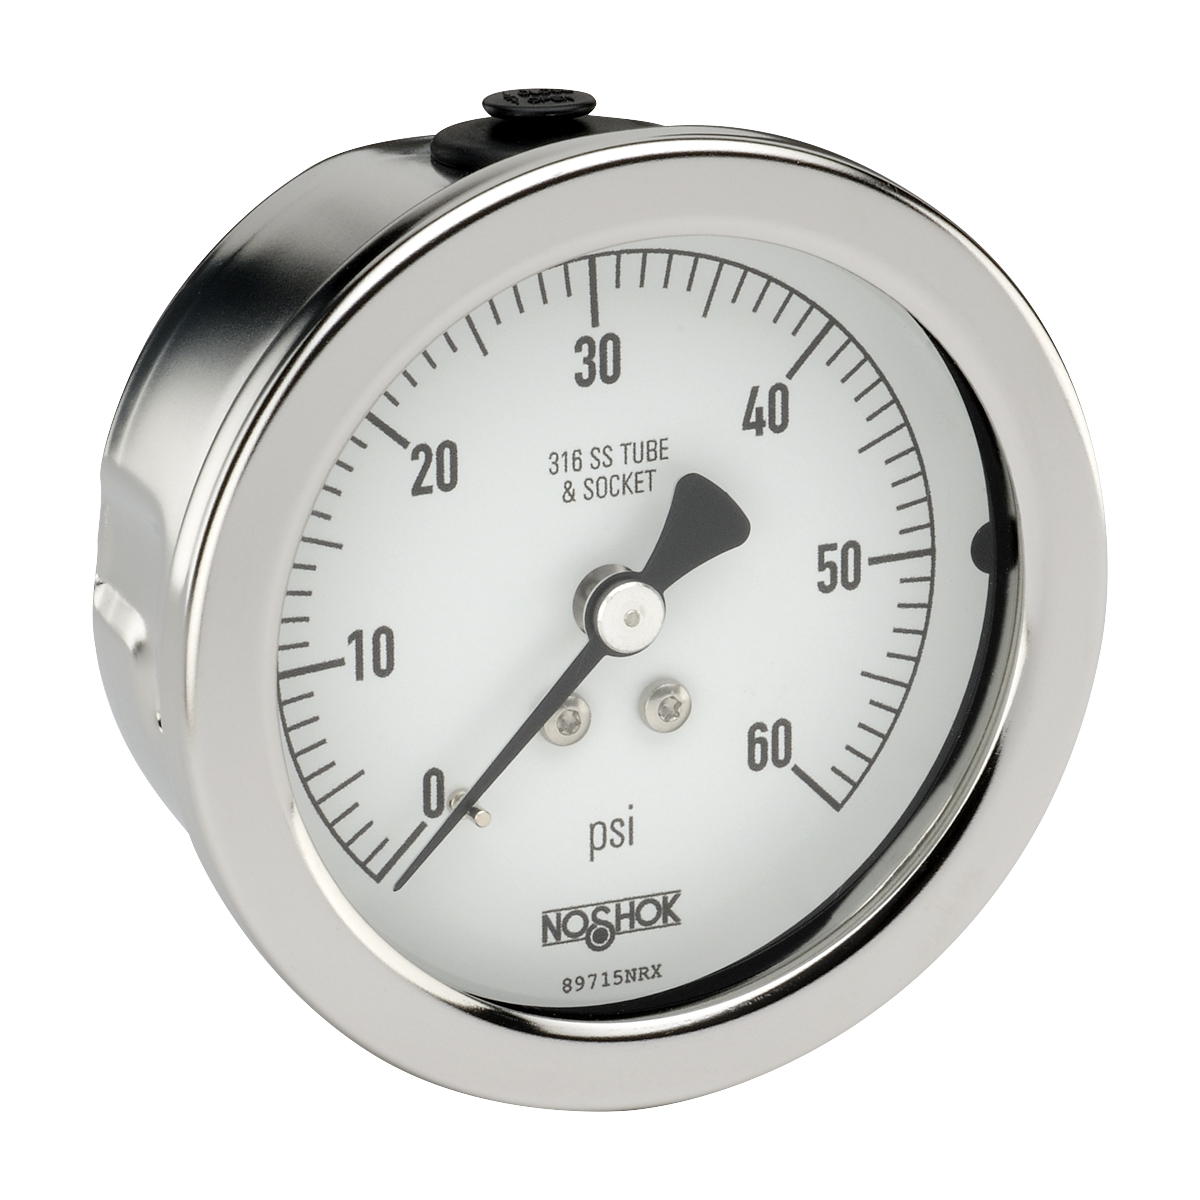 25-510-5000-psi-SSFF 400/500 Series All Stainless Steel Dry and Liquid Filled Pressure Gauges